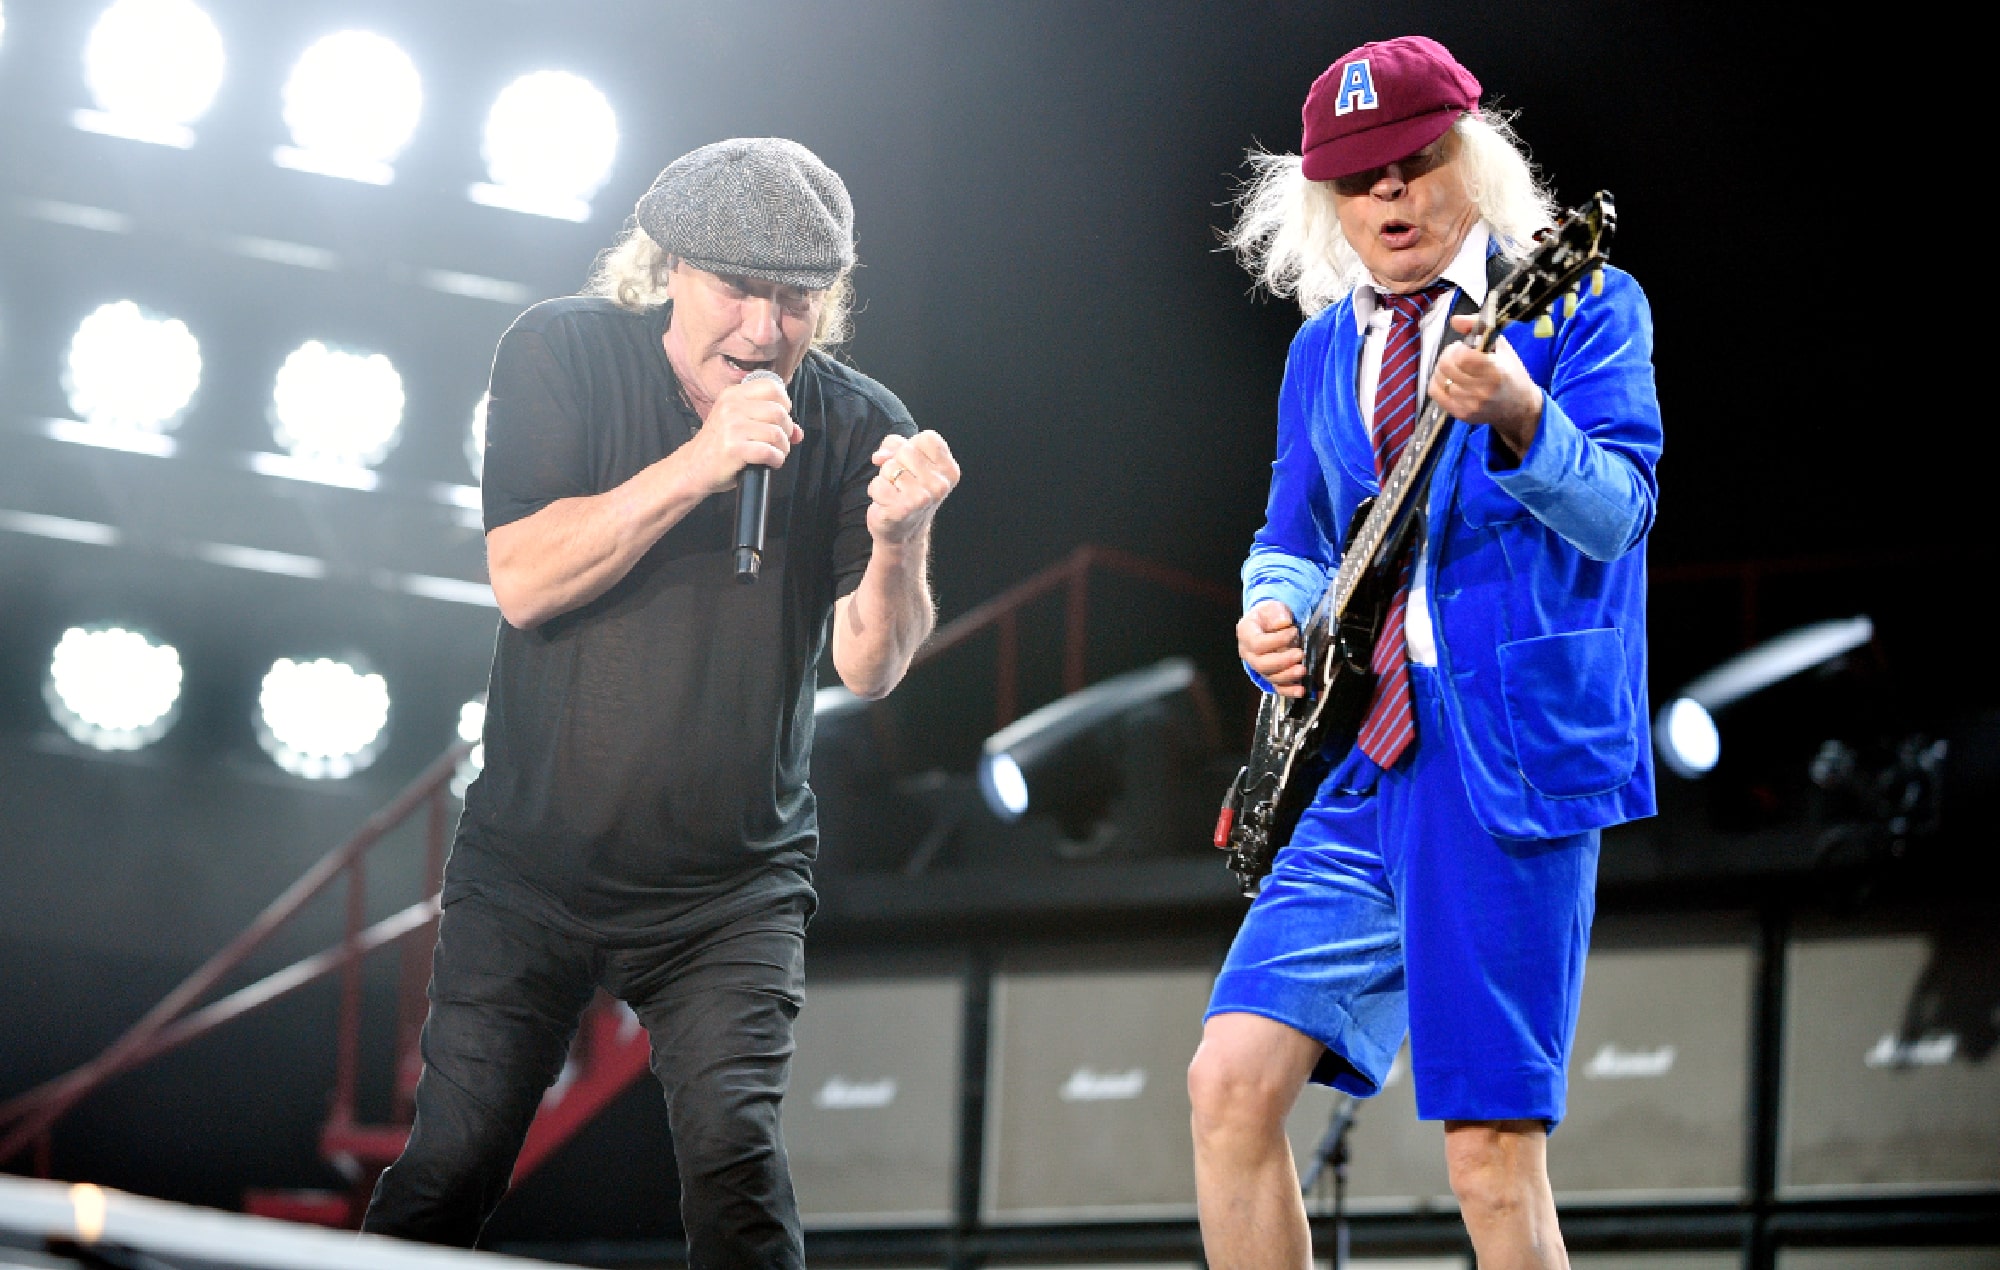 Here’s what AC/DC played at the first of their two nights at Wembley Stadium